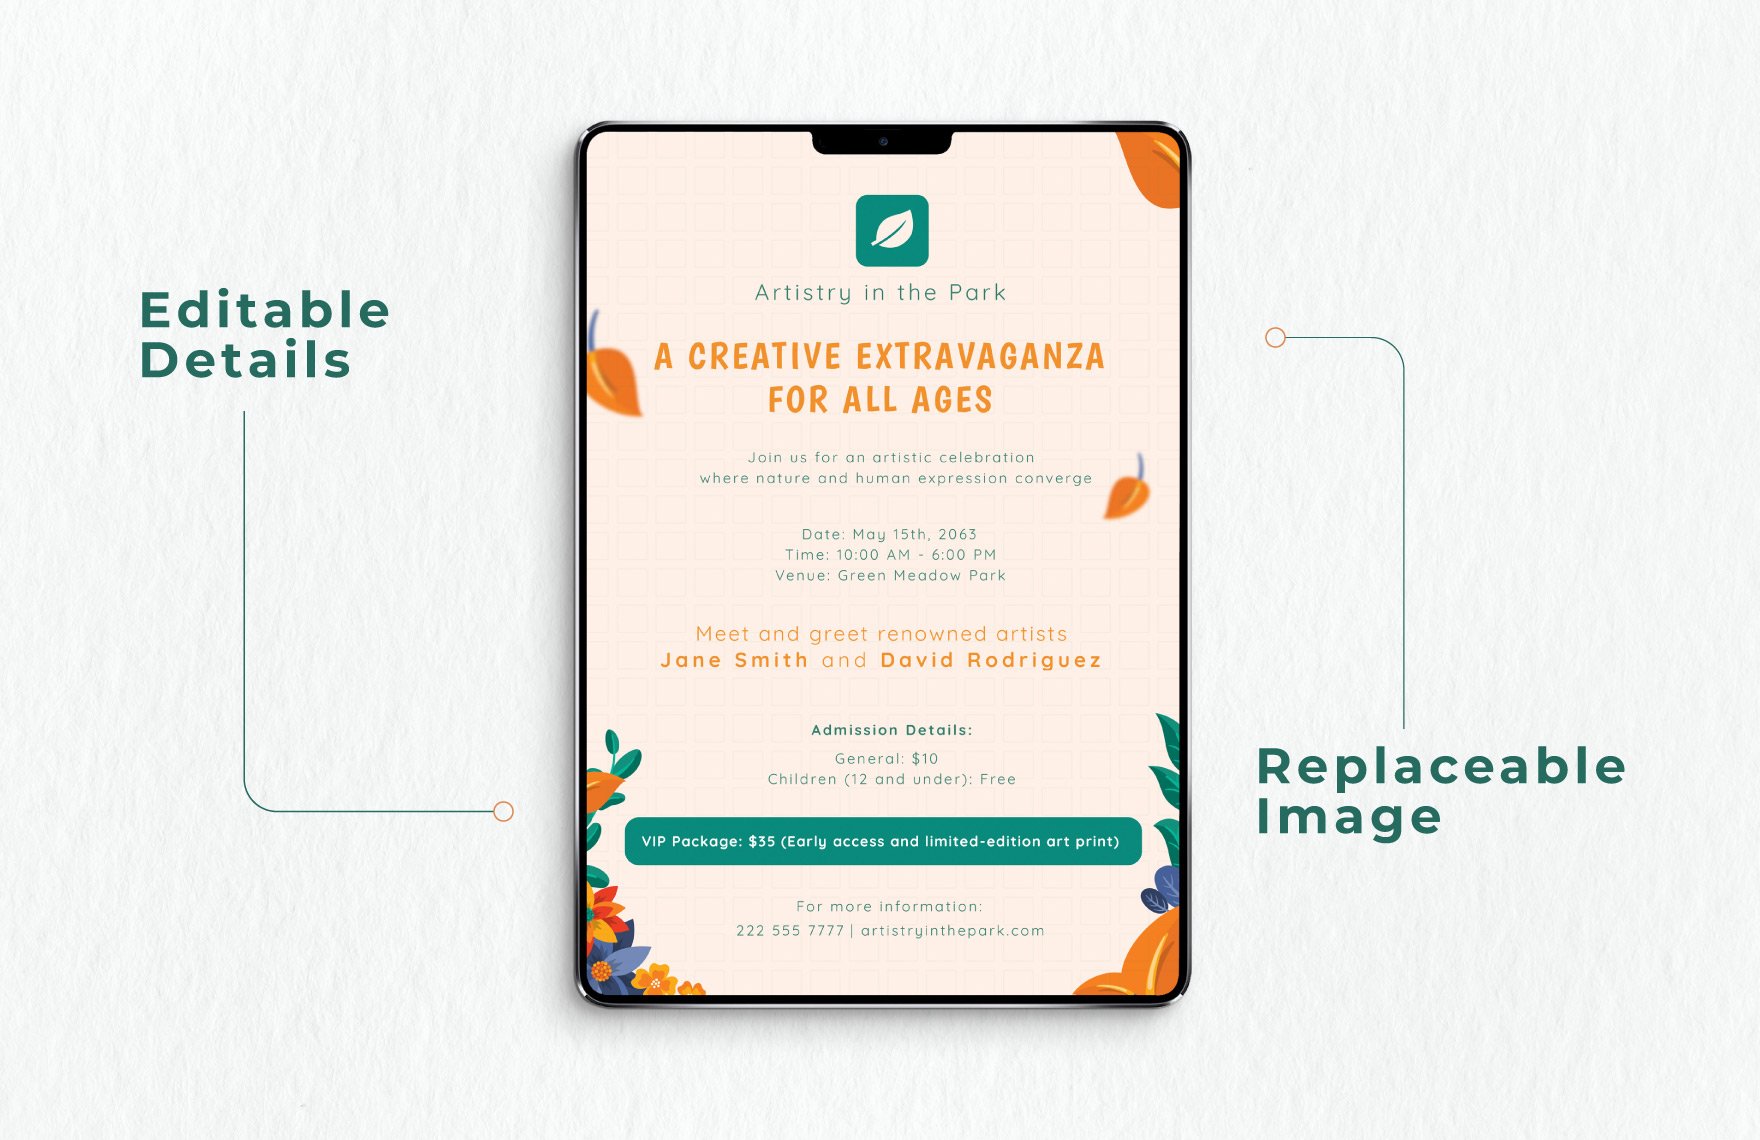 Event Flyer Template